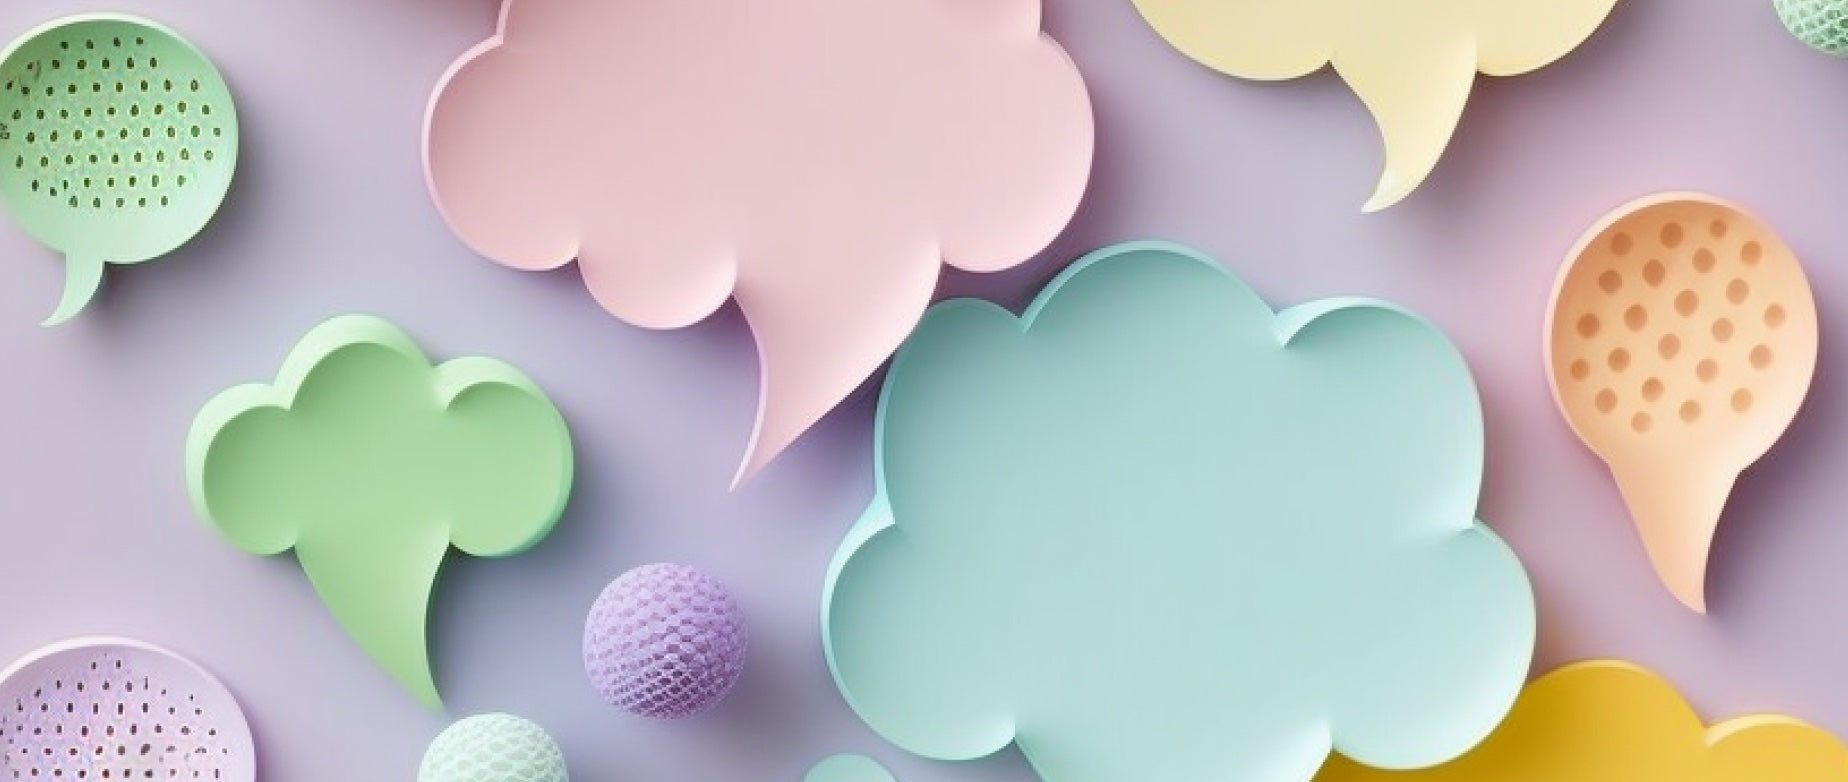 speech bubbles in various colors: monthly newsletter